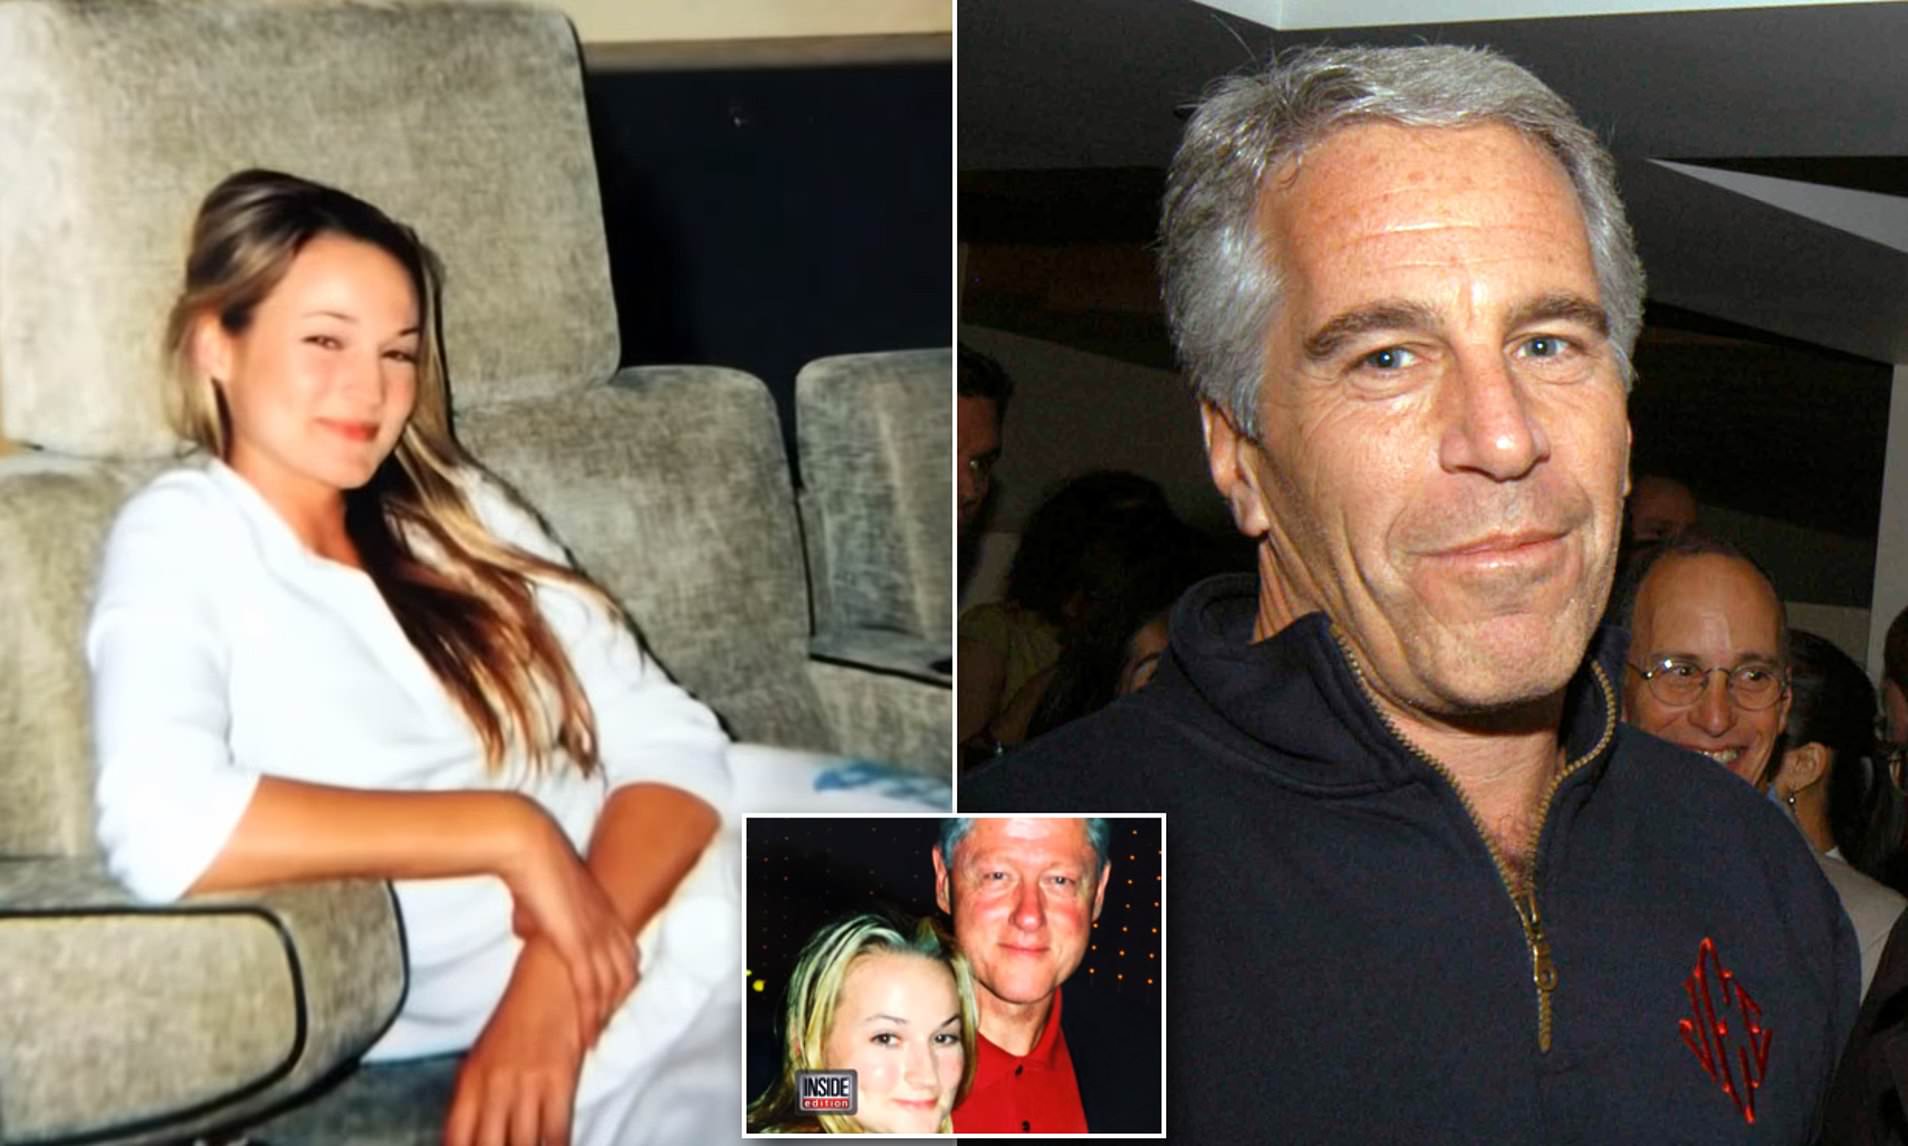 Epstein 'Lolita Express' Passenger List To 'Pedo Island' To Be Made Public, Sparking Fear In Rich And Famous